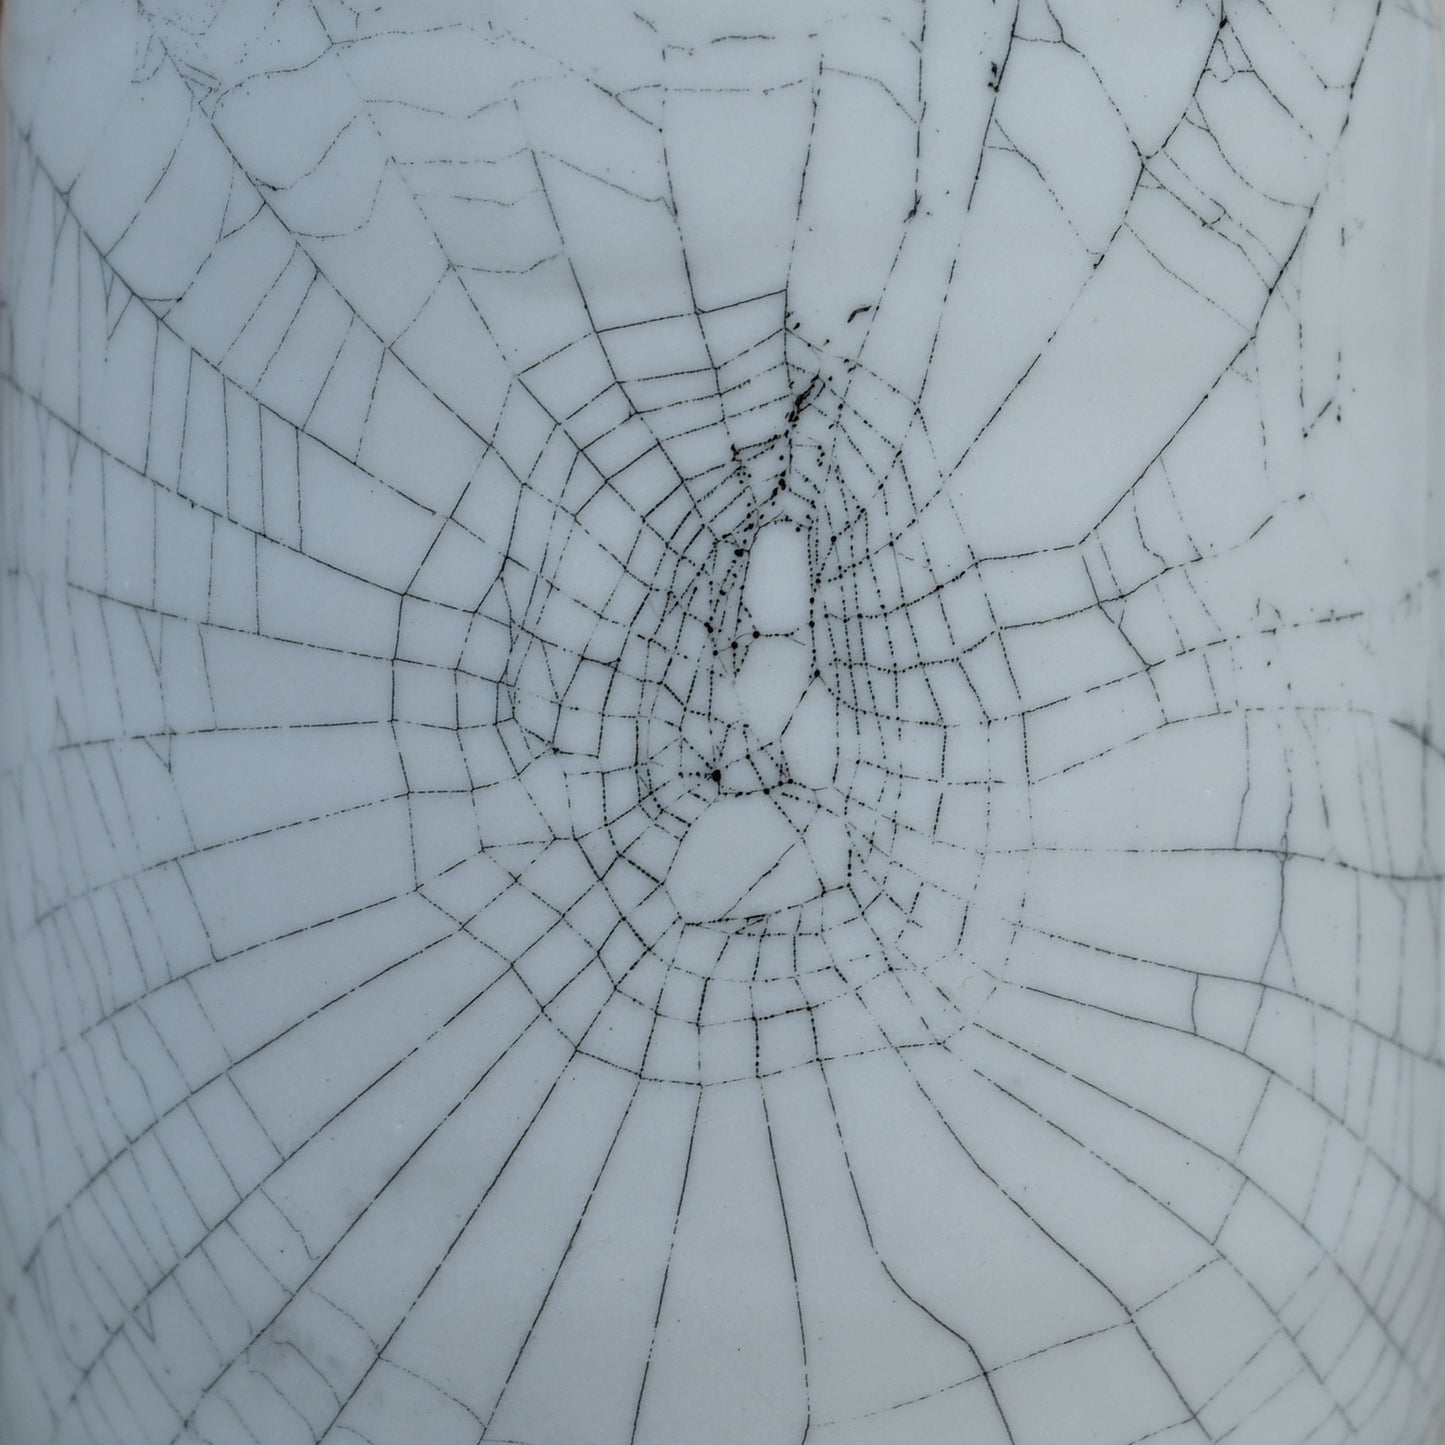 Web on Clay (249), Web Collected October 31, 2022